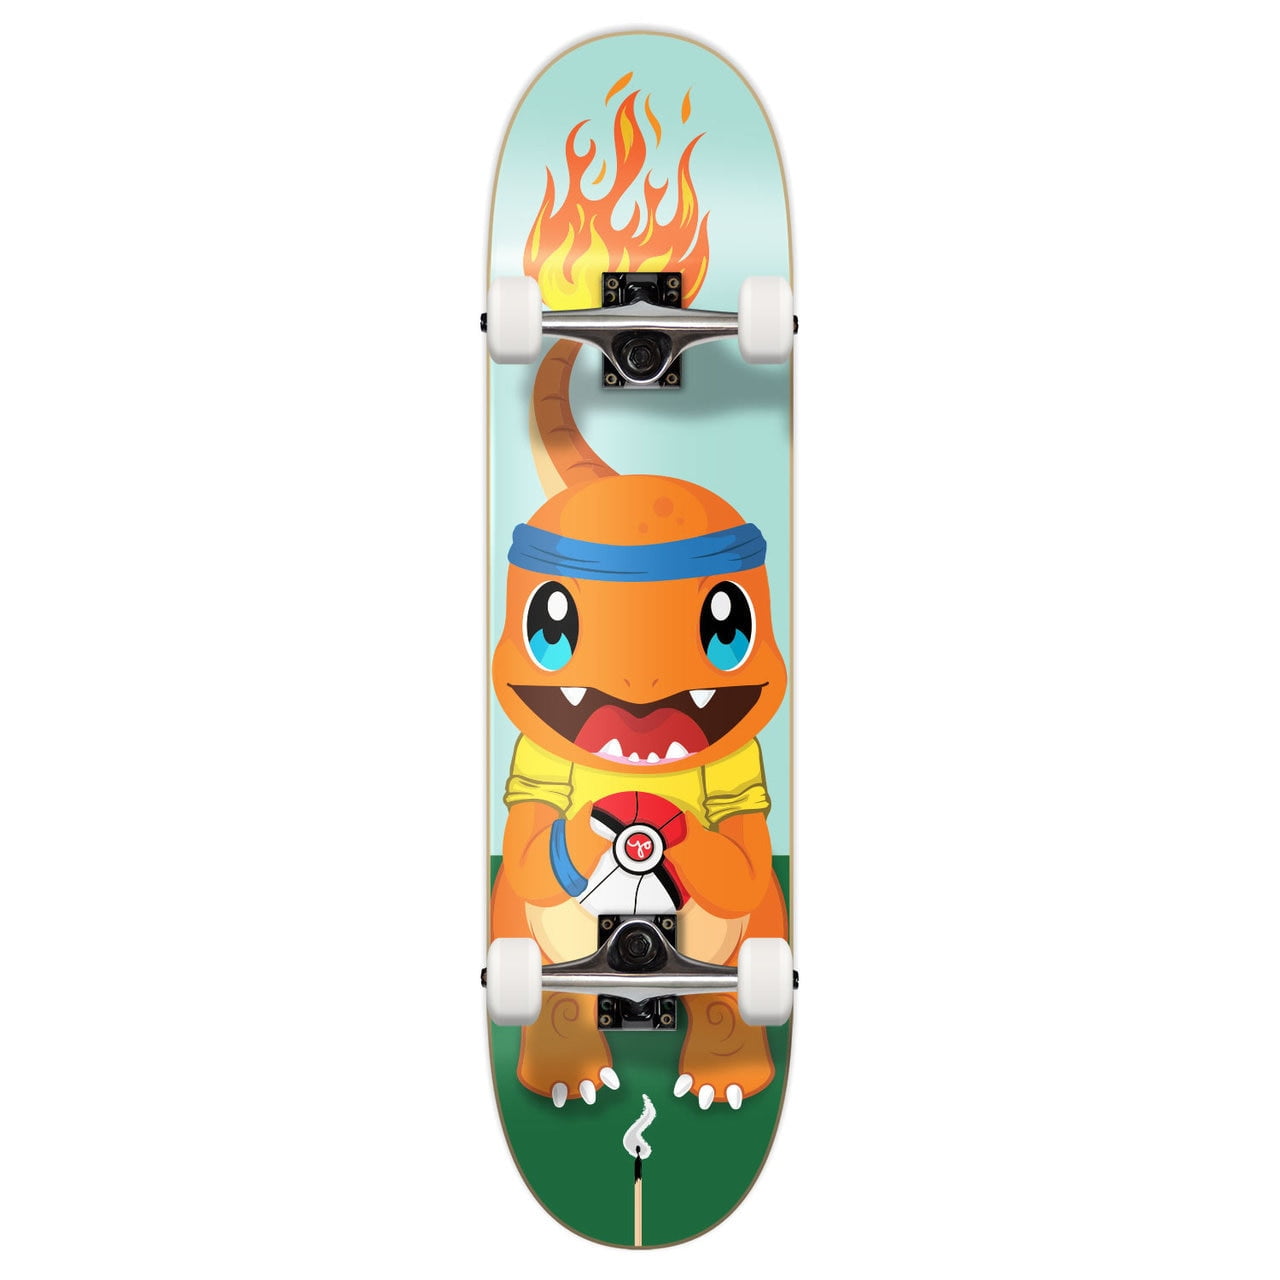 Yocaher GraphicComplete Skateboard 31